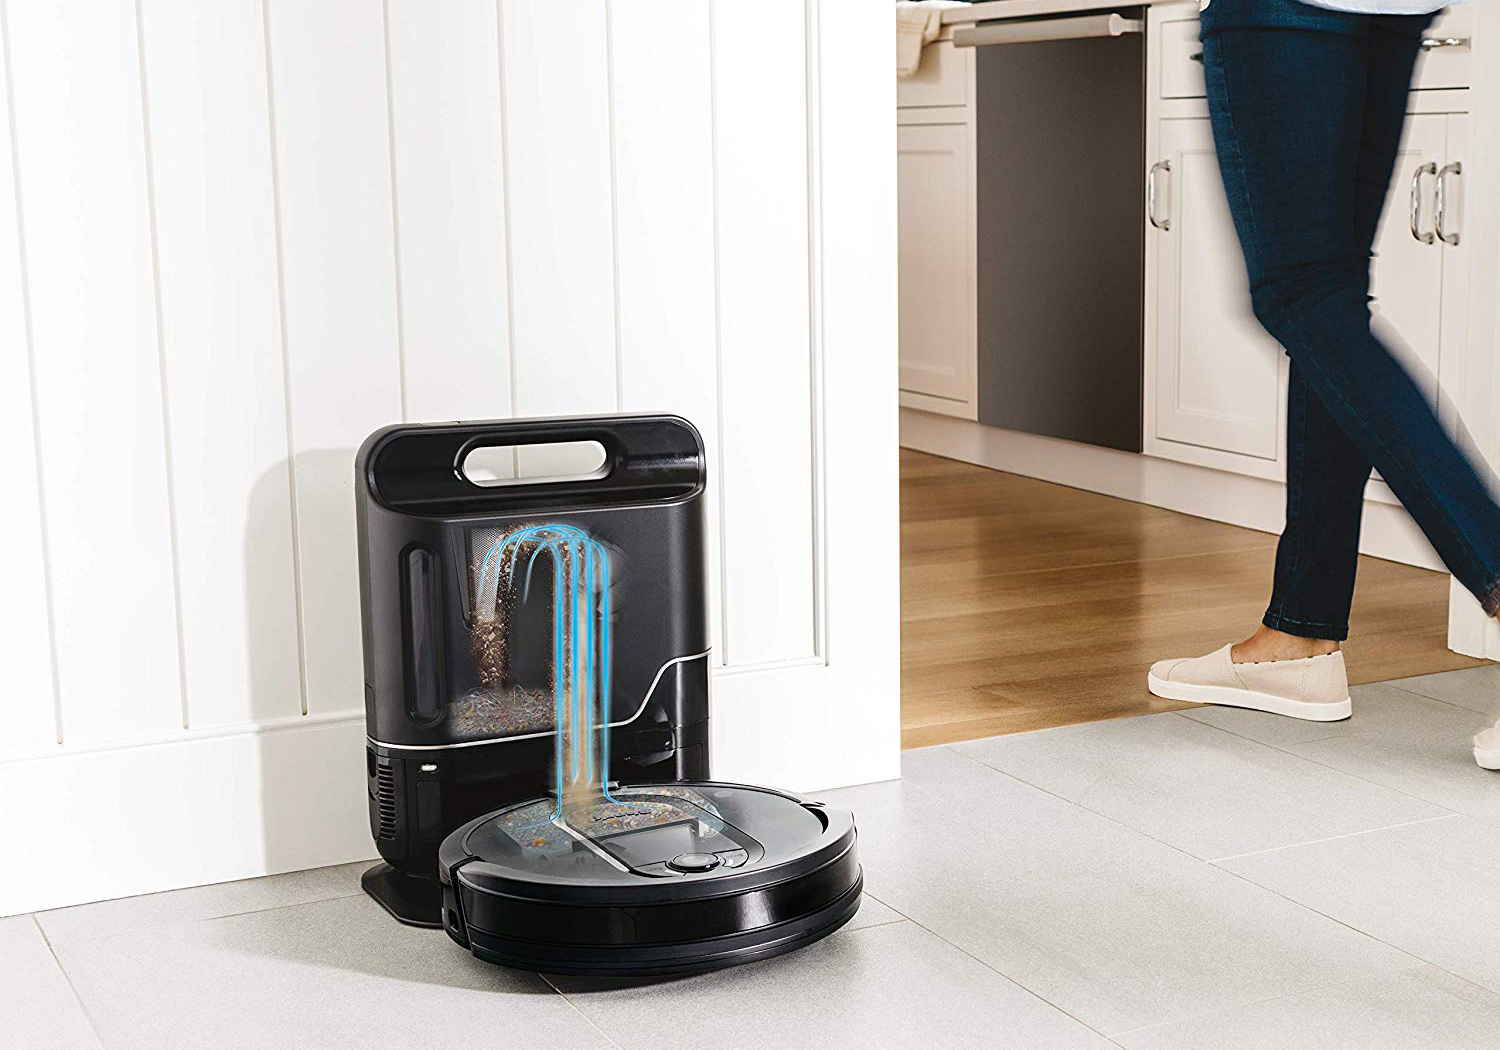 This robot vacuum empties itself like a $1,000 Roomba, but it’s only